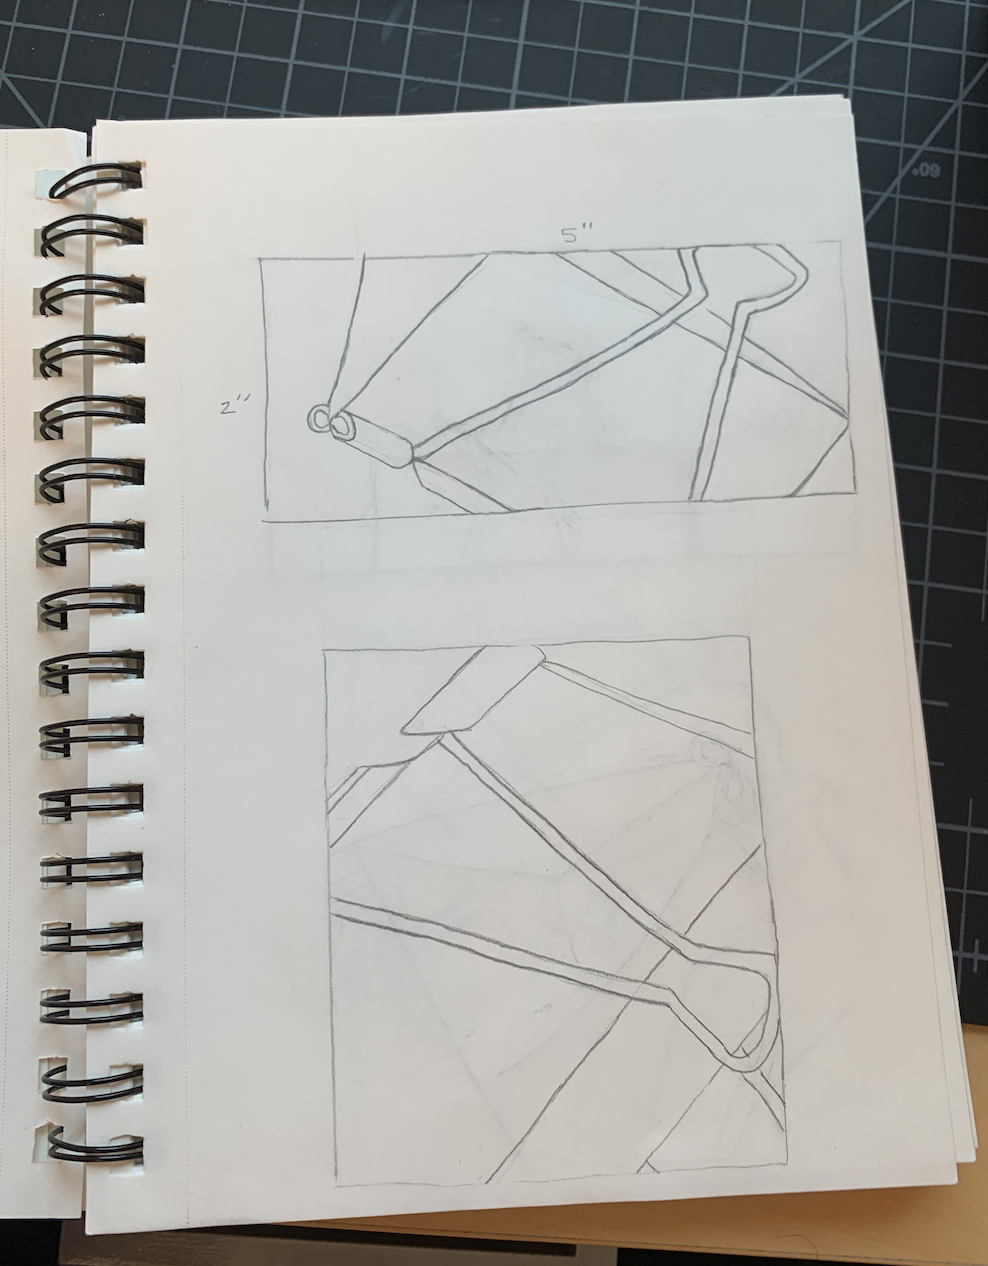 Thumbnail Sketches and Grid Transpositions